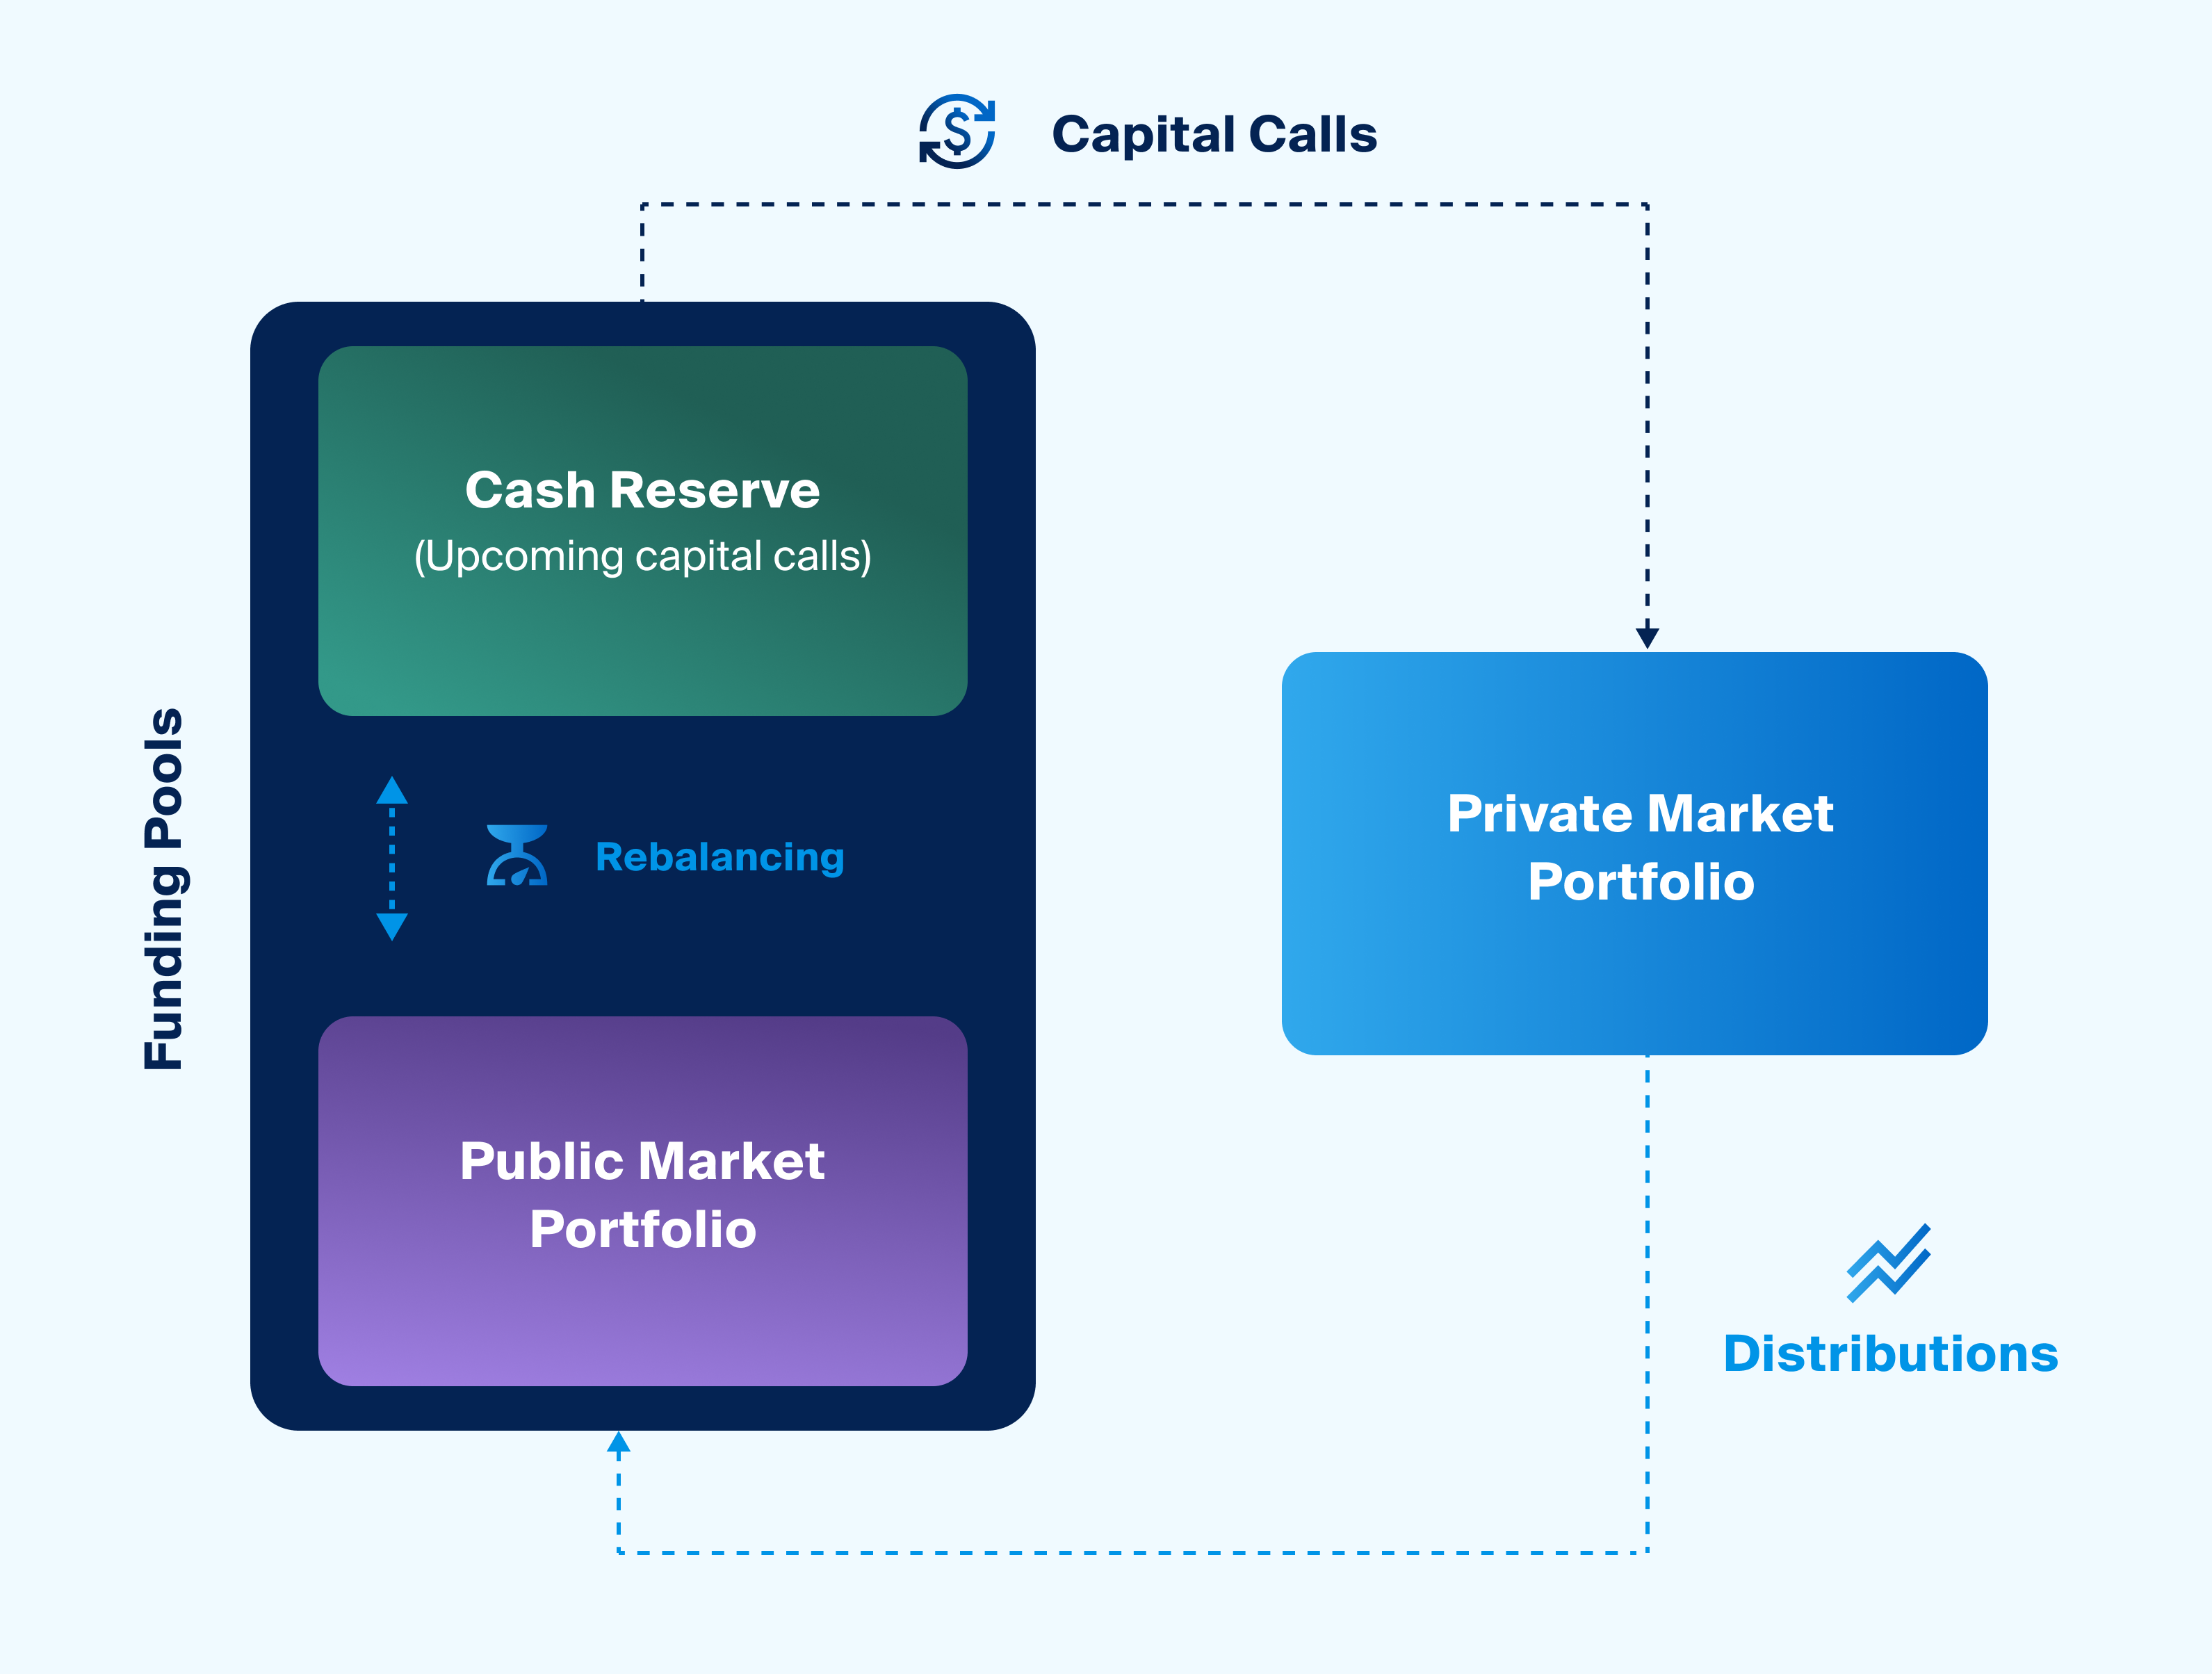 Investing through drawdown structures requires maintaining cash reserves to fund capital calls or using distributions from mature commitments